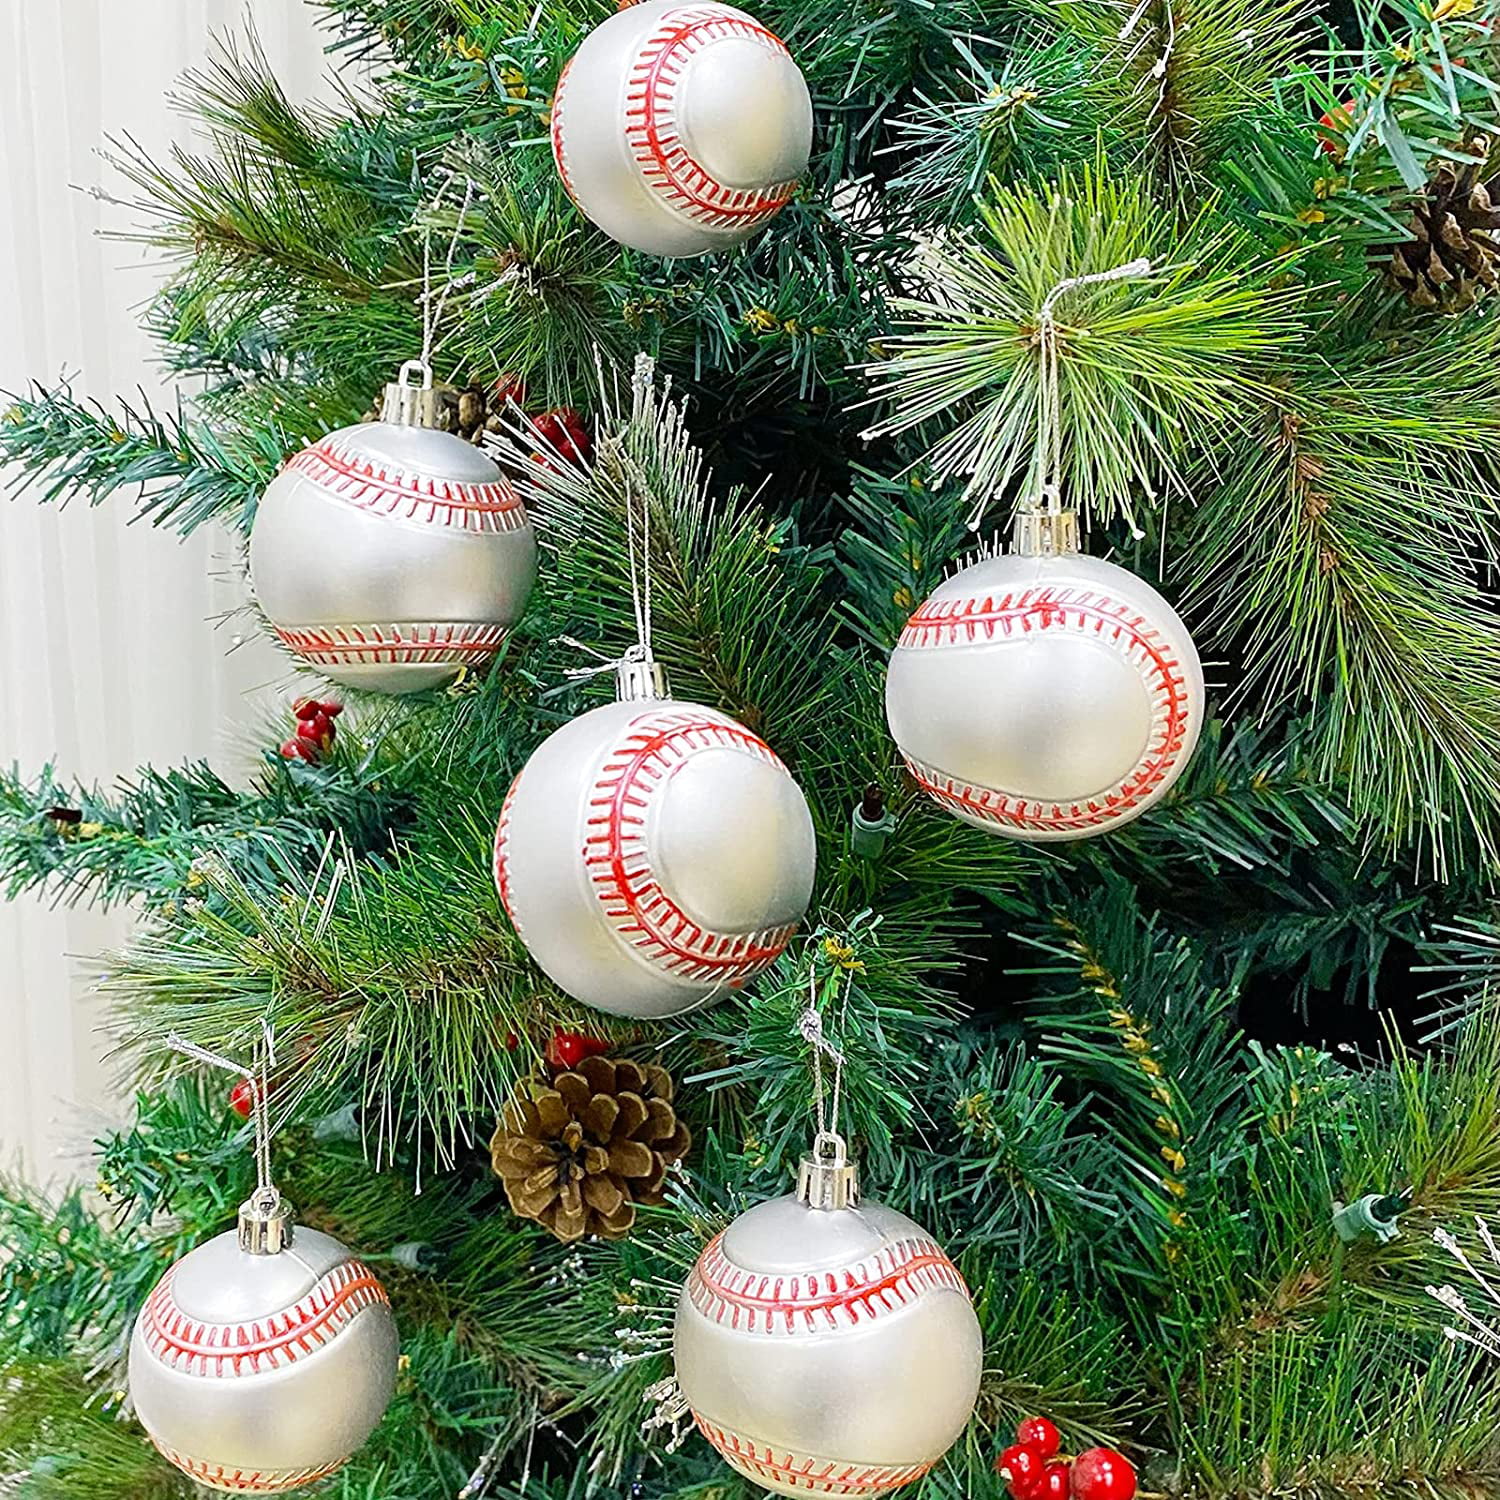 TURNMEON 6 Pack Baseball Christmas Ball Ornaments Christmas Decorations 2.36 Inch Shatterproof Xmas Tree Ornaments Balls with Hanging Loop for Holiday Party Christmas Decorations Indoor Outdoor Home